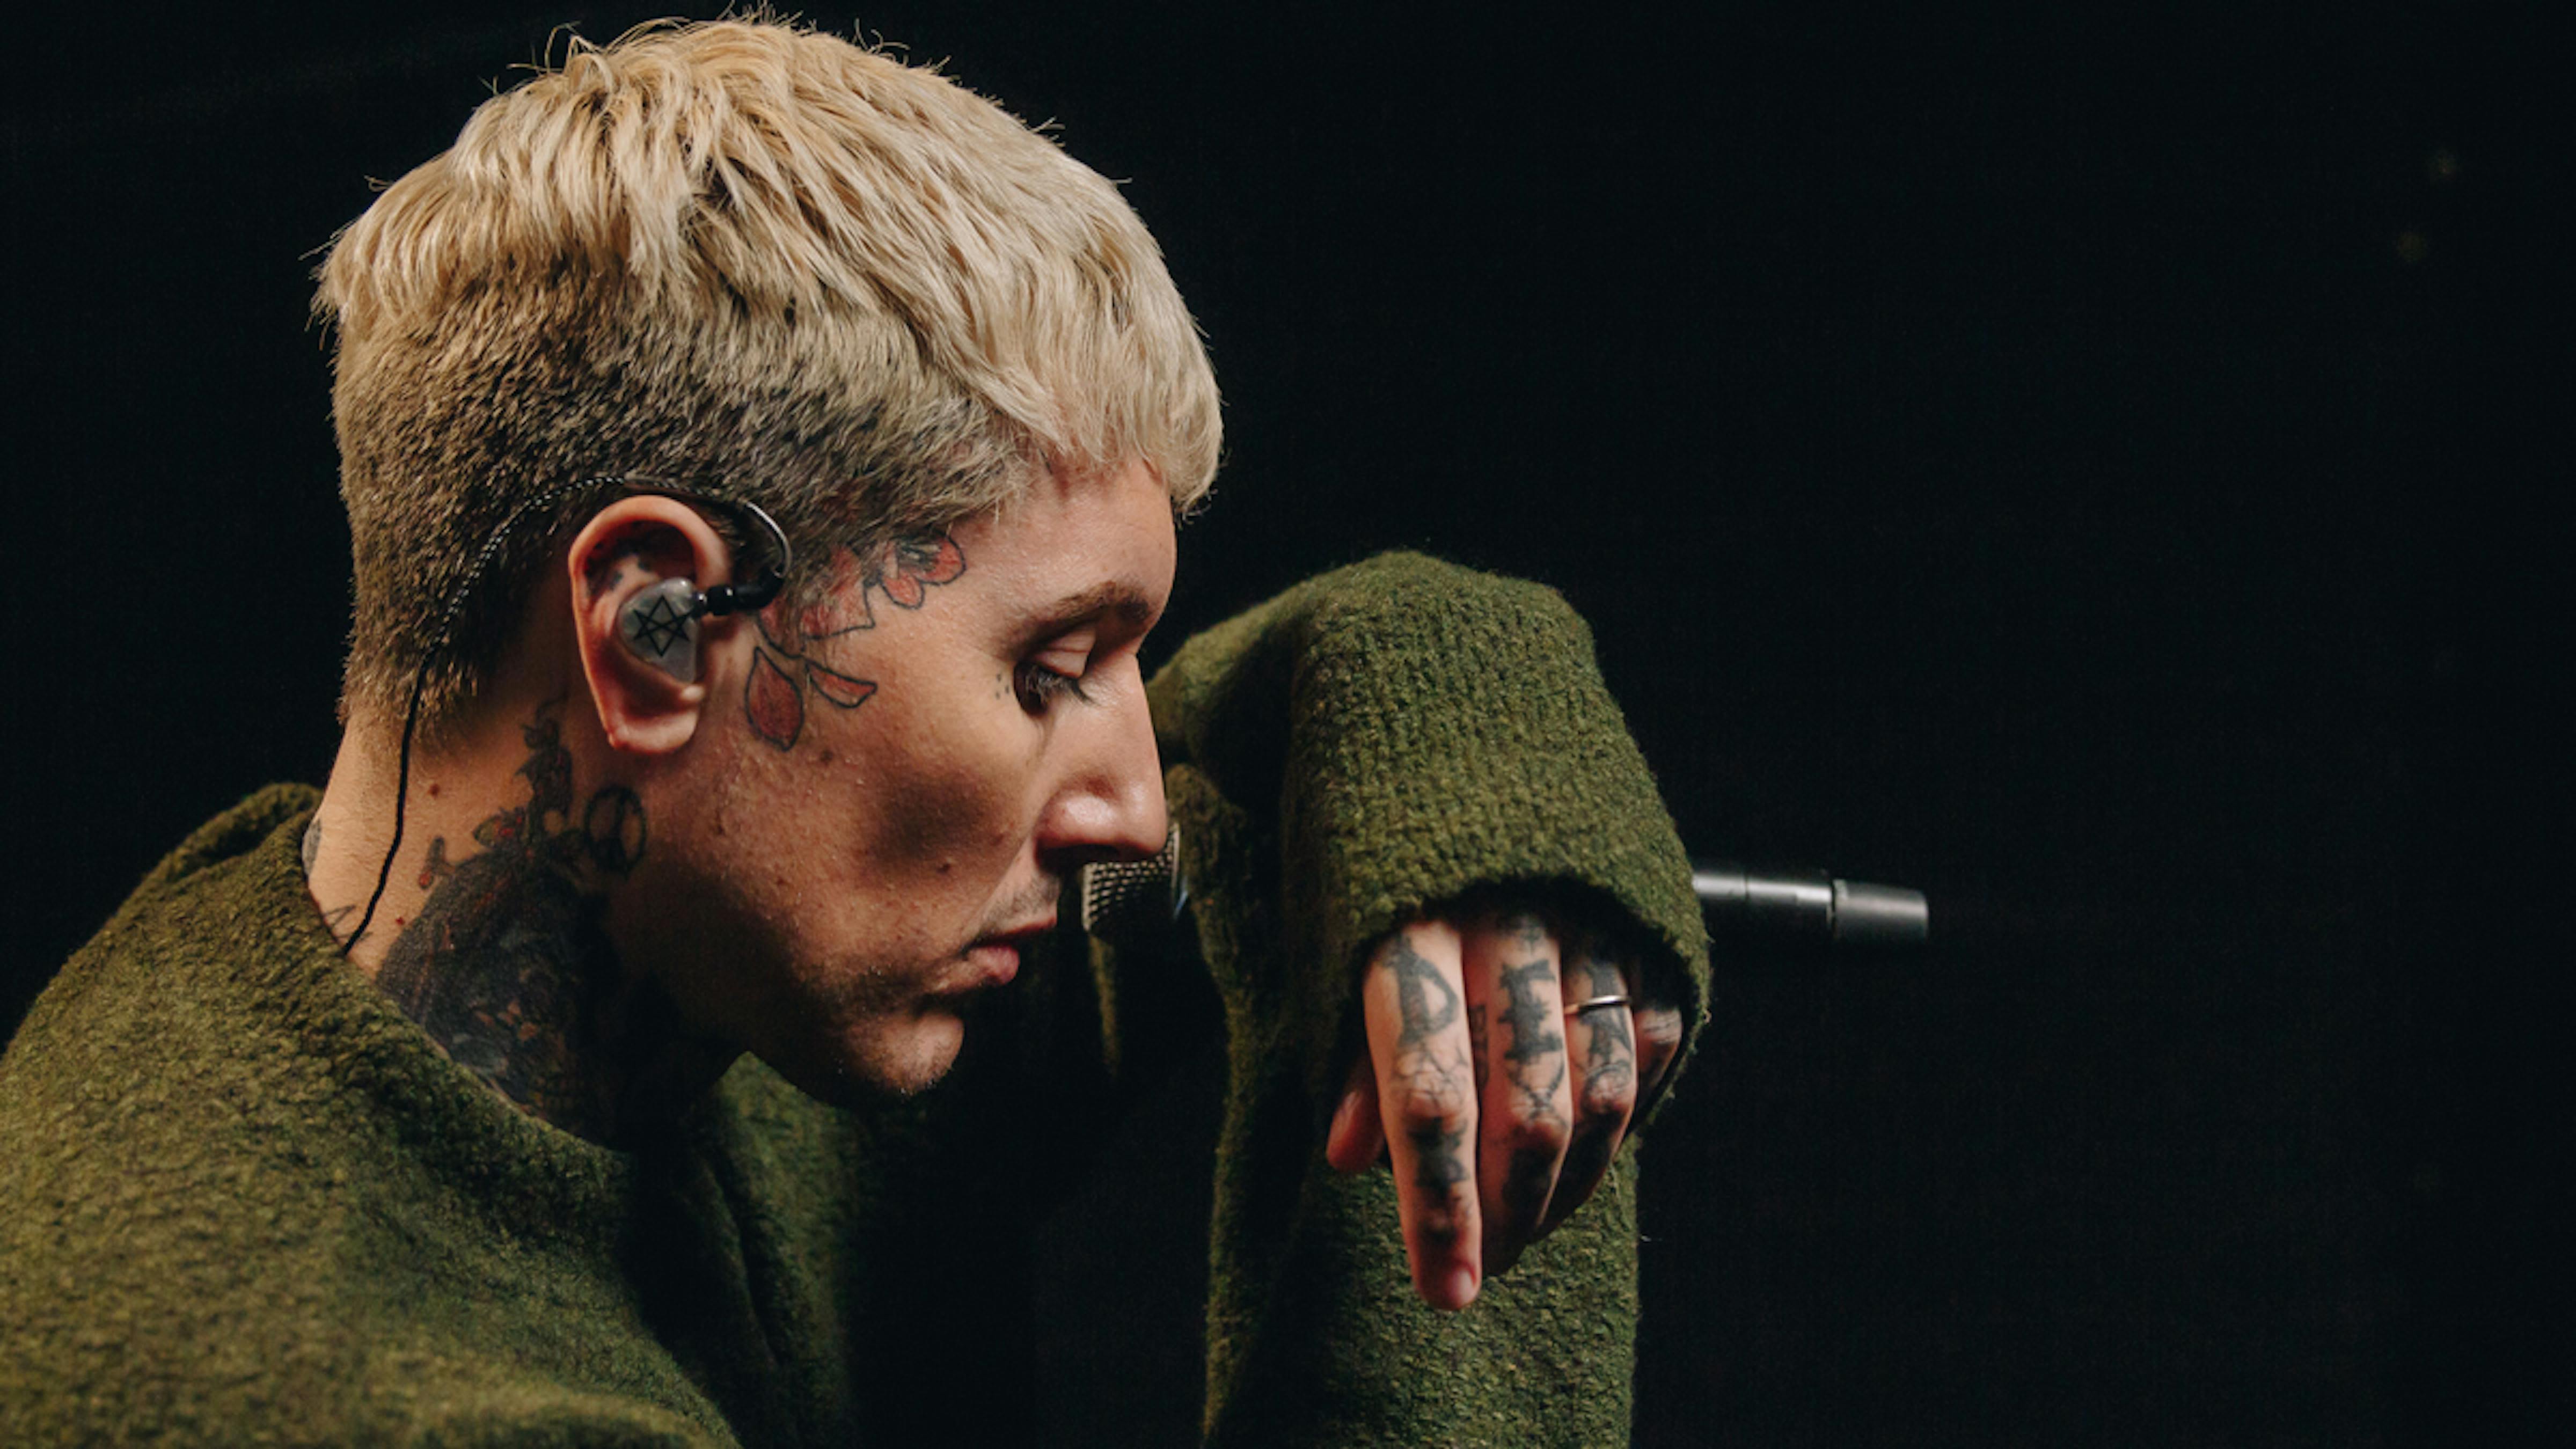 Oli Sykes BMTH VEVO London ?auto=compress&fit=crop&w=4800&h=2700